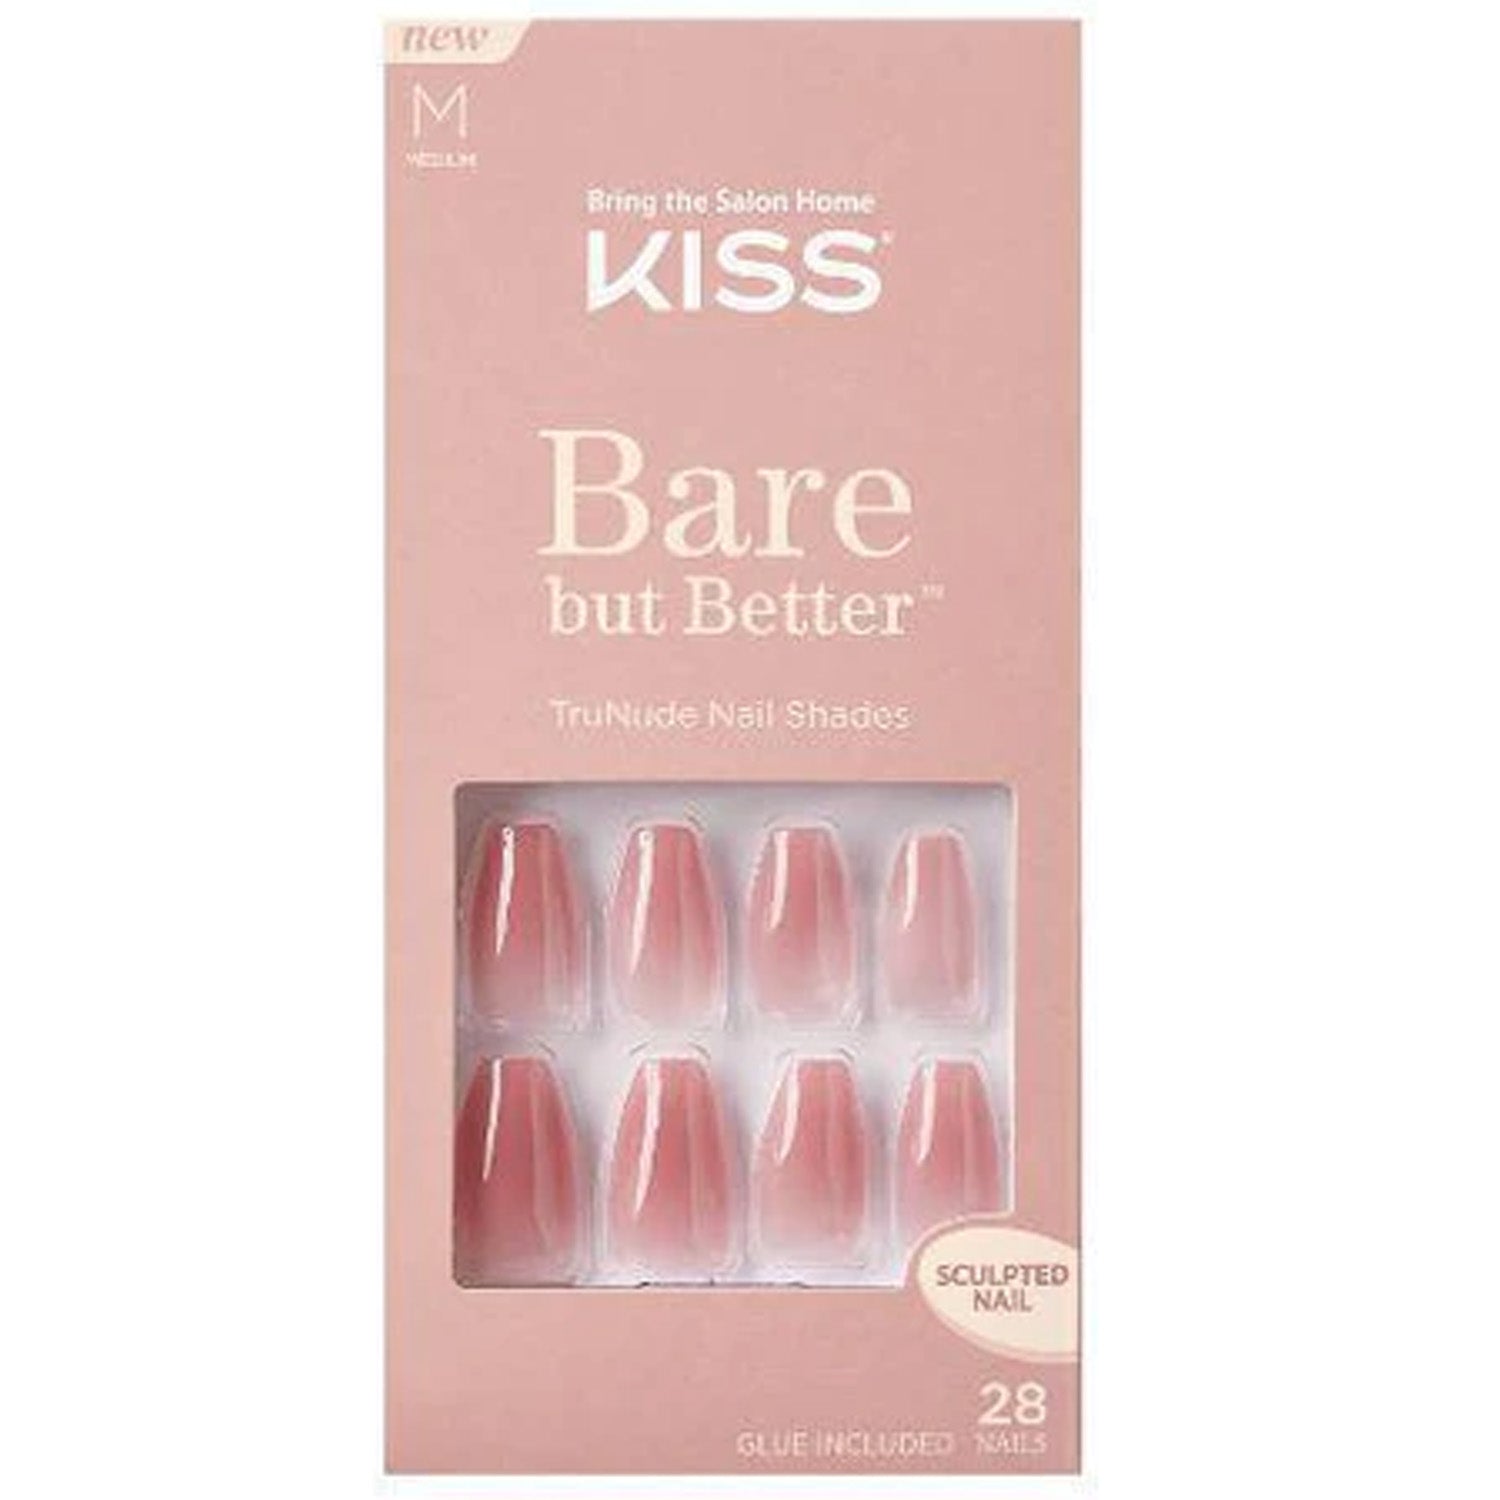 KISS BARE BUT BETTER NAILS